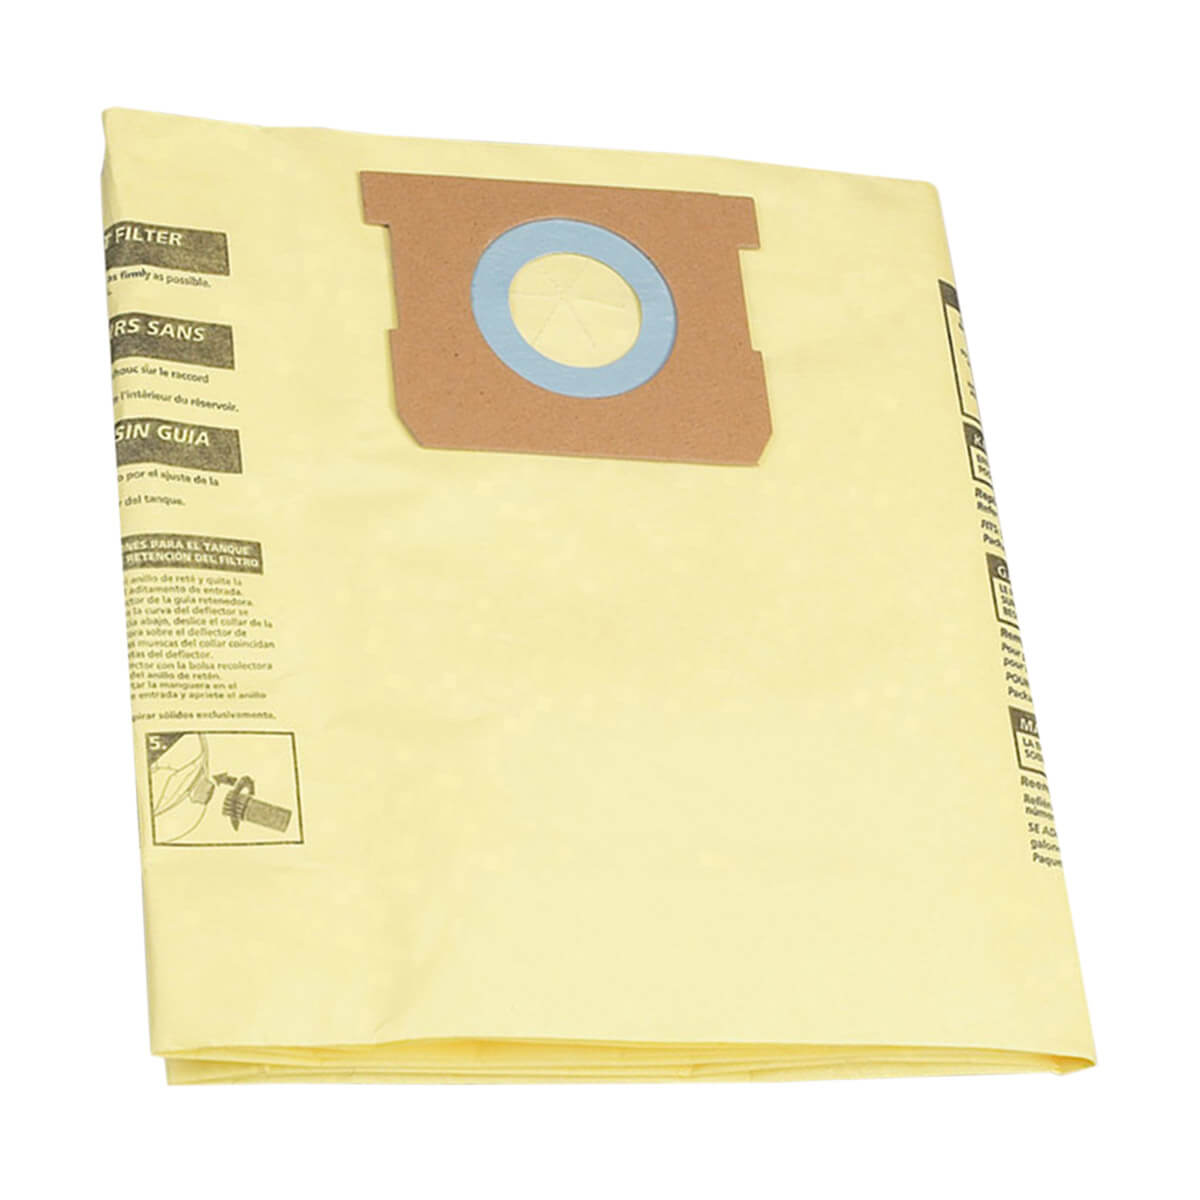 SHOP-VAC® Type H Filter Bags - 18.9-30.3 L - 2 Pack